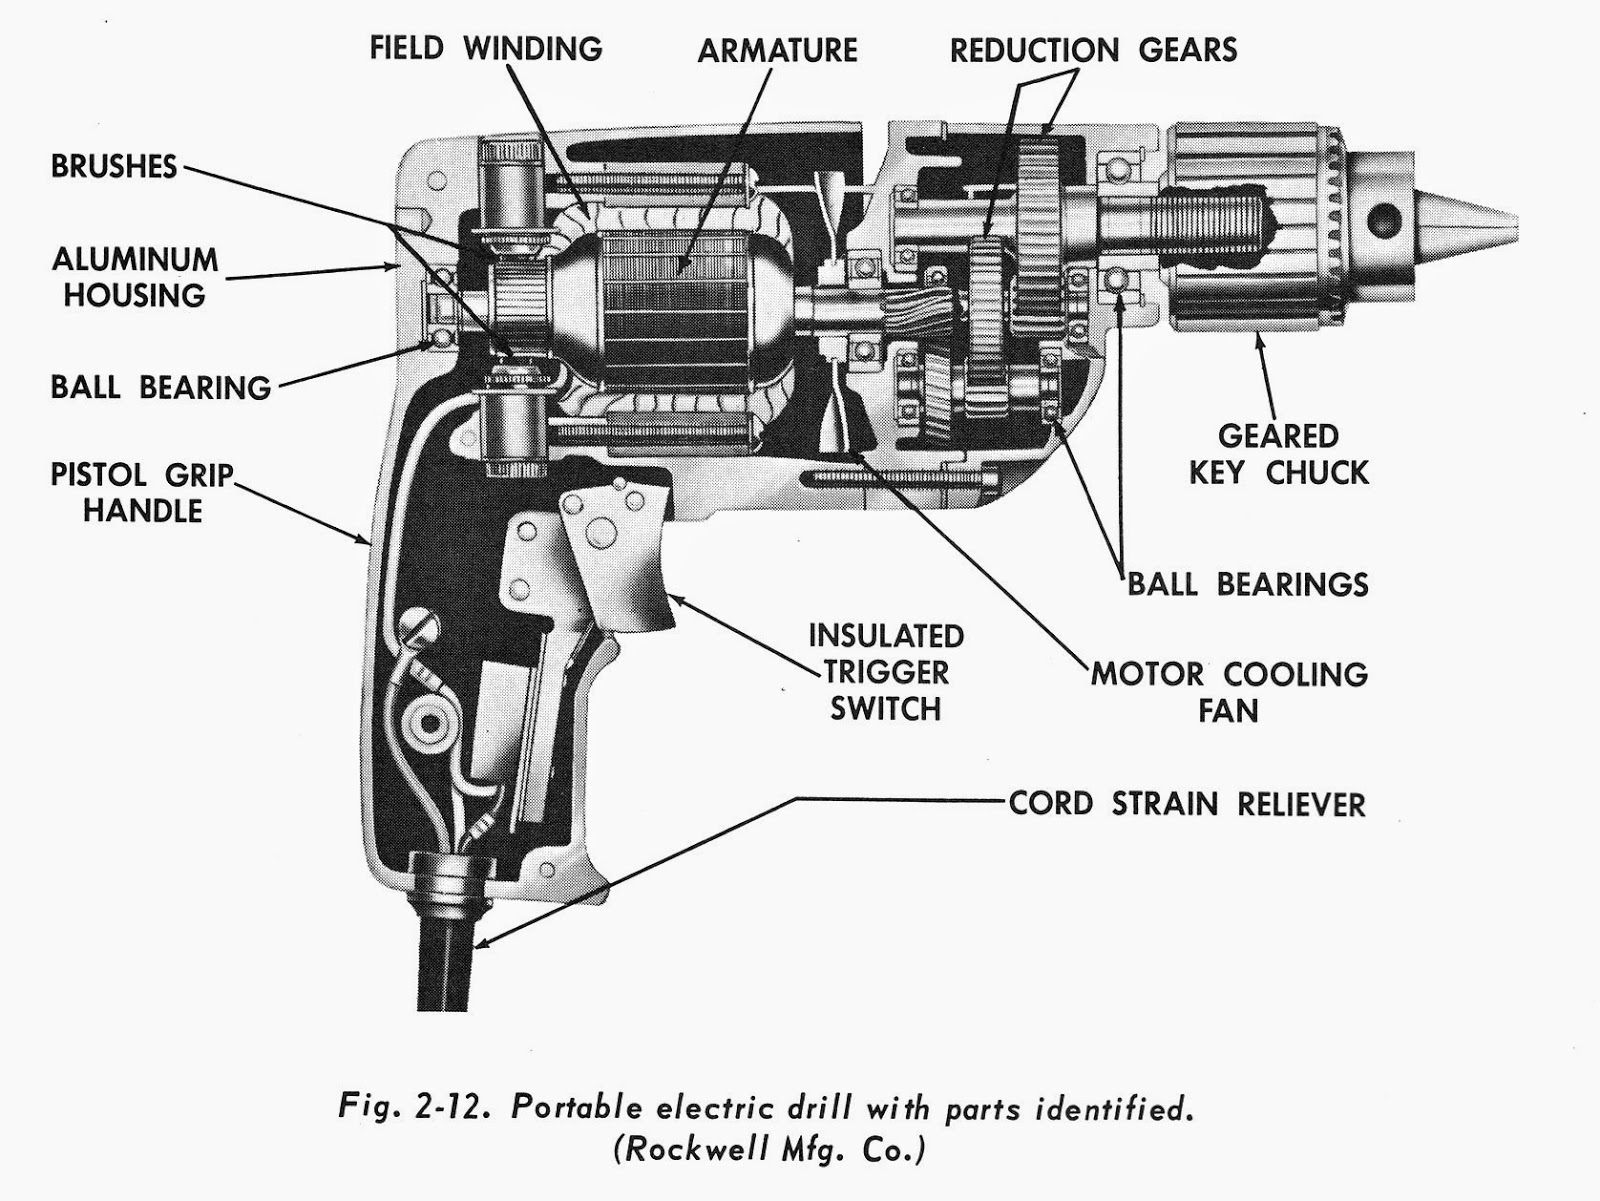 Electric Drill in Cross Section - MechanicsTips